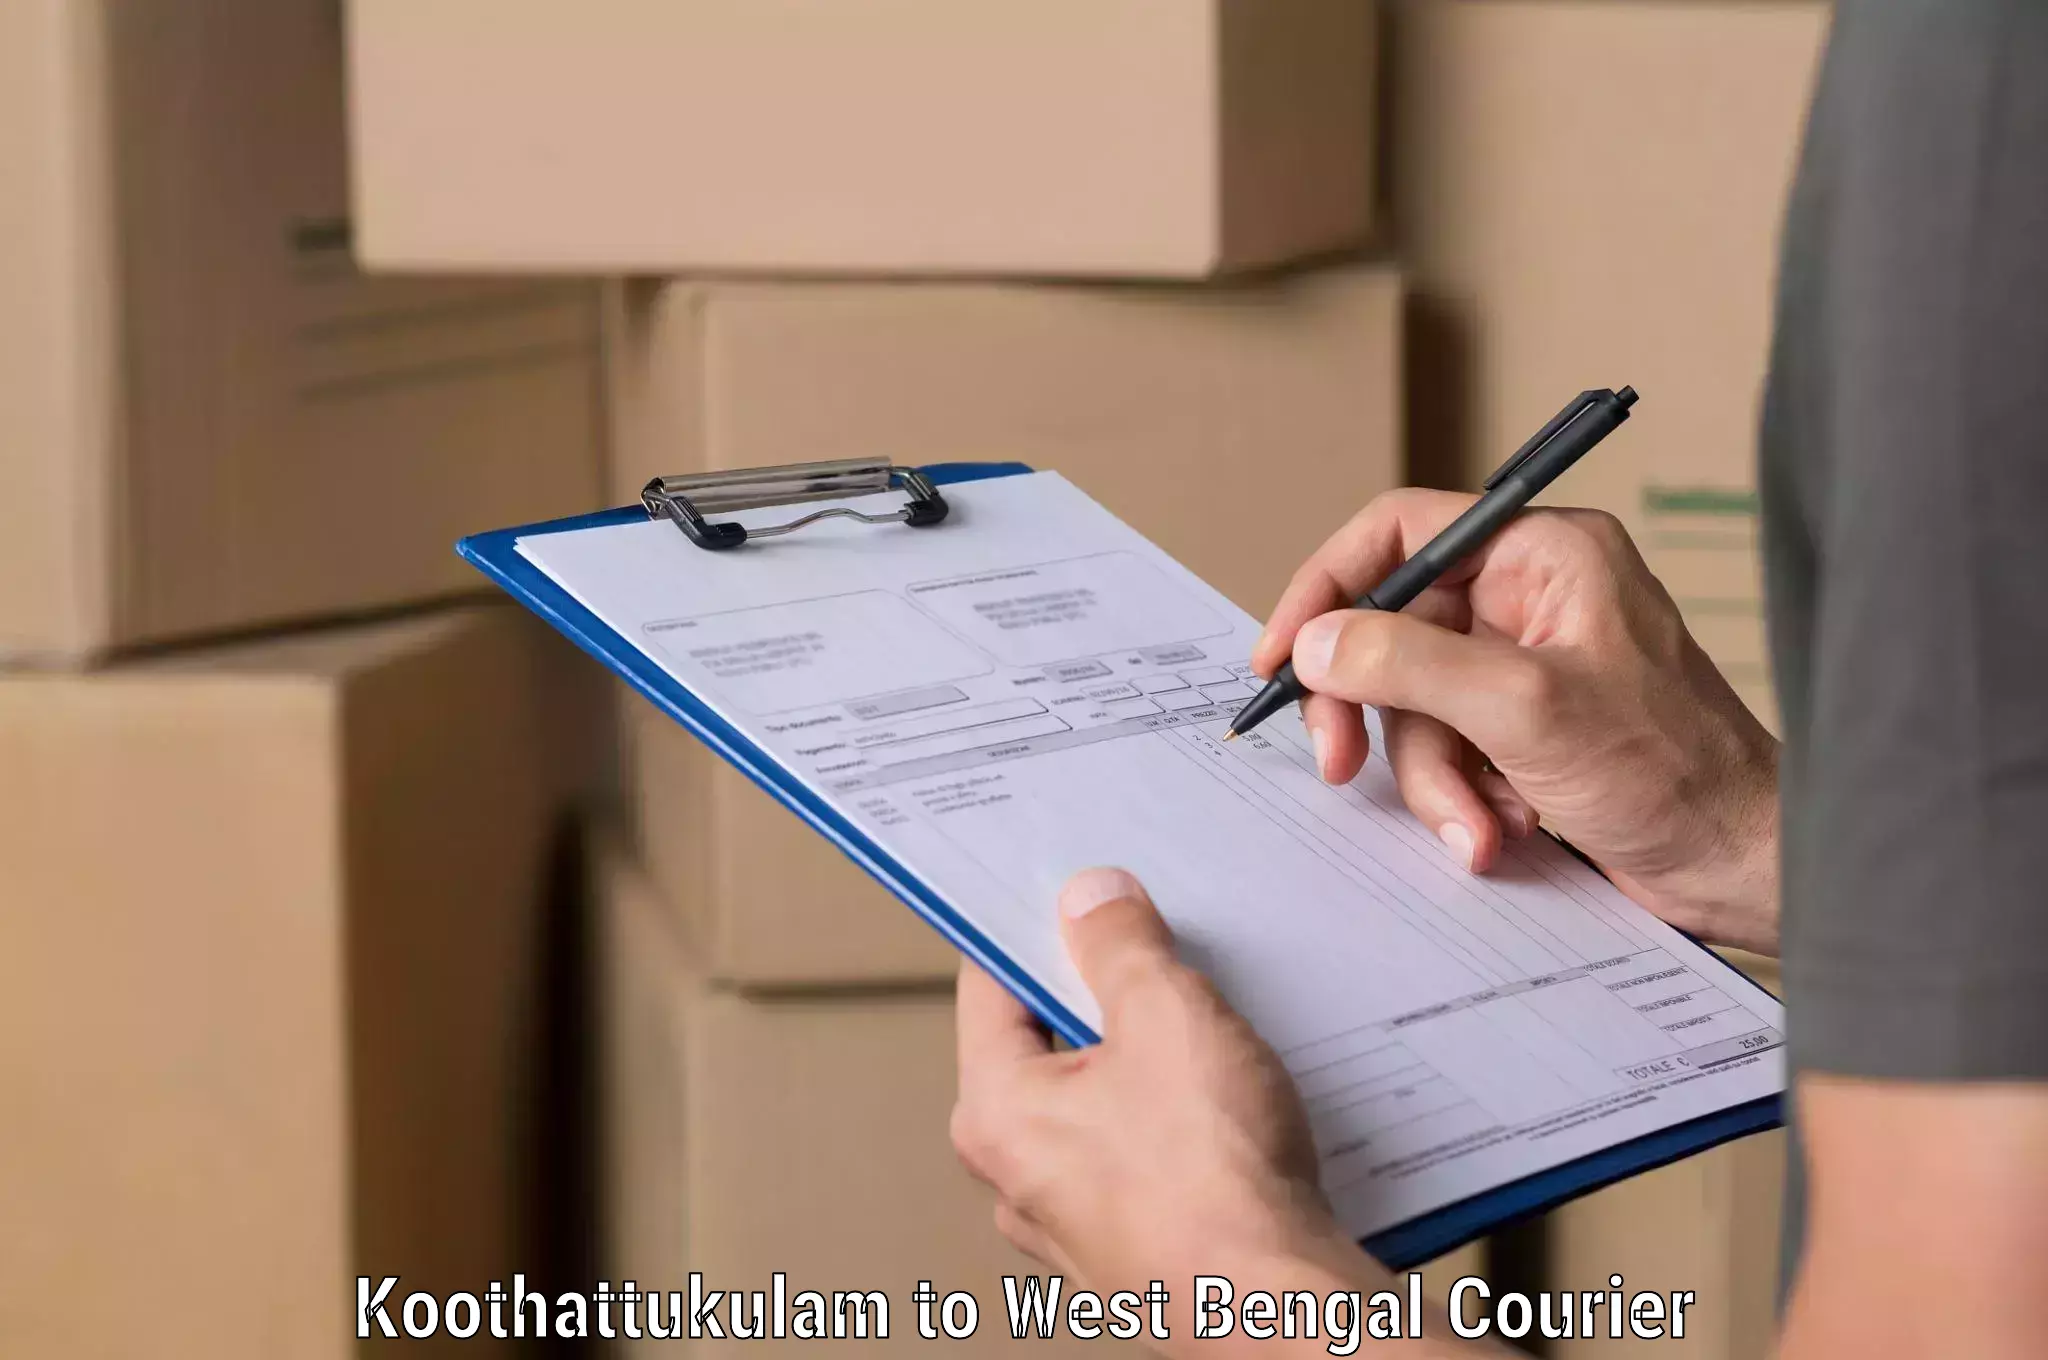 Global courier networks Koothattukulam to West Bengal